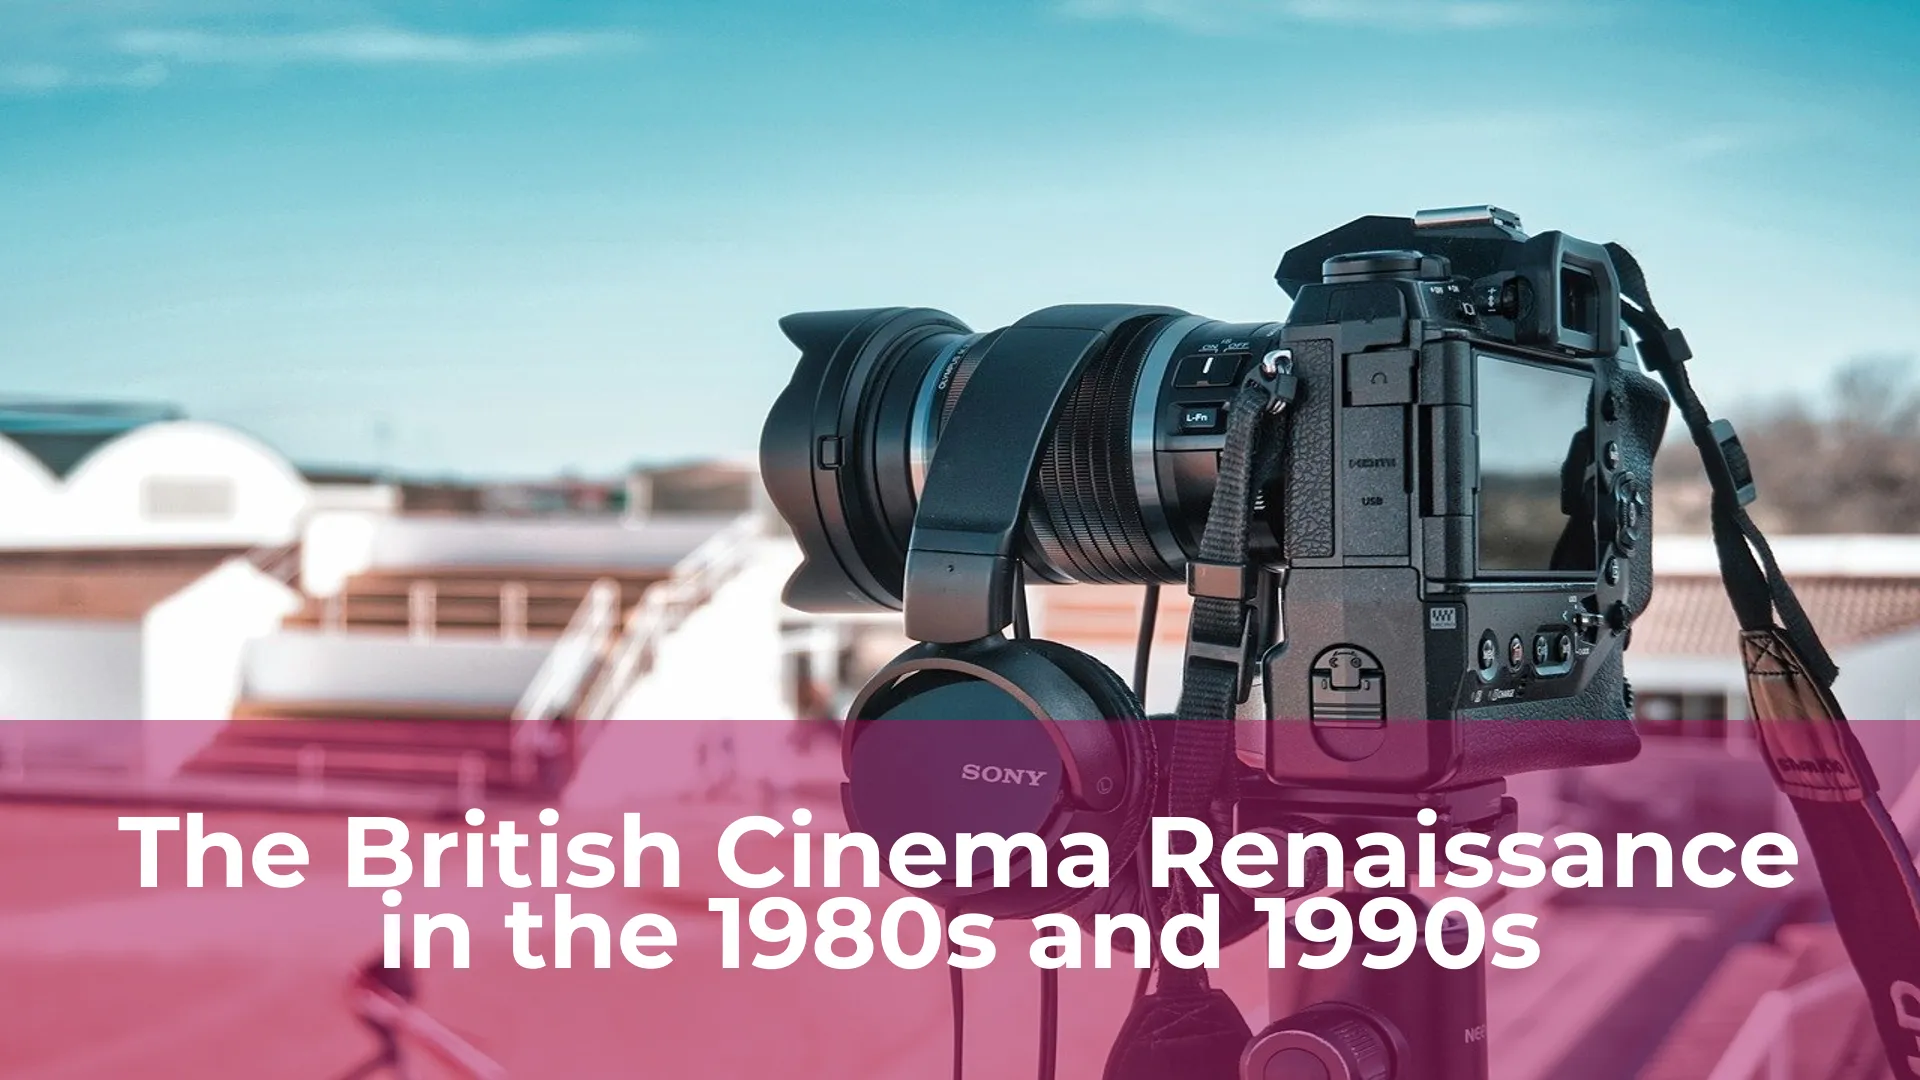 The british cinema renaissance in the 1980s and 1990s